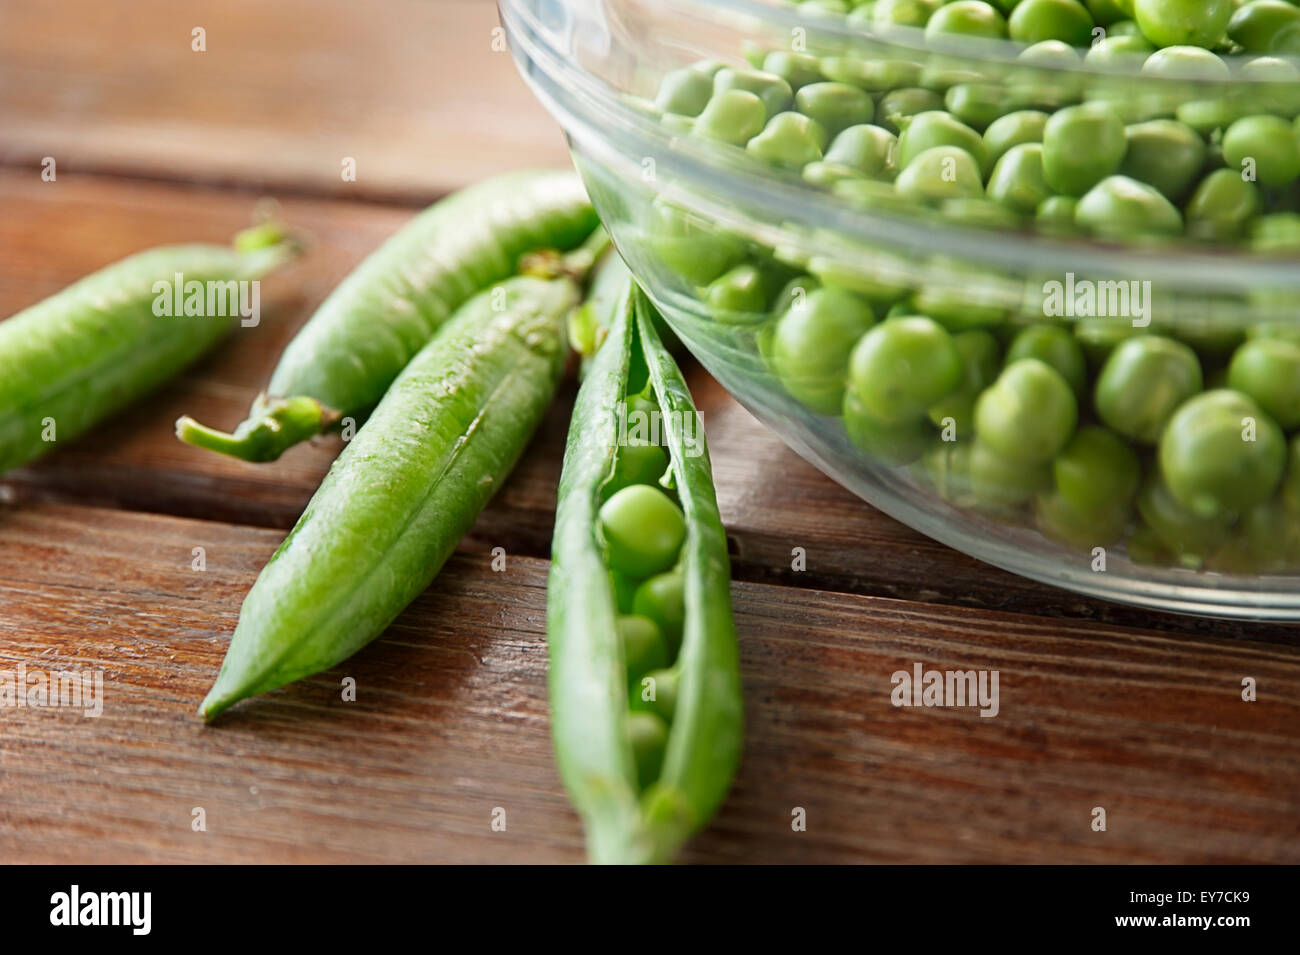 Pea pods and glass bowl full of peas Stock Photo